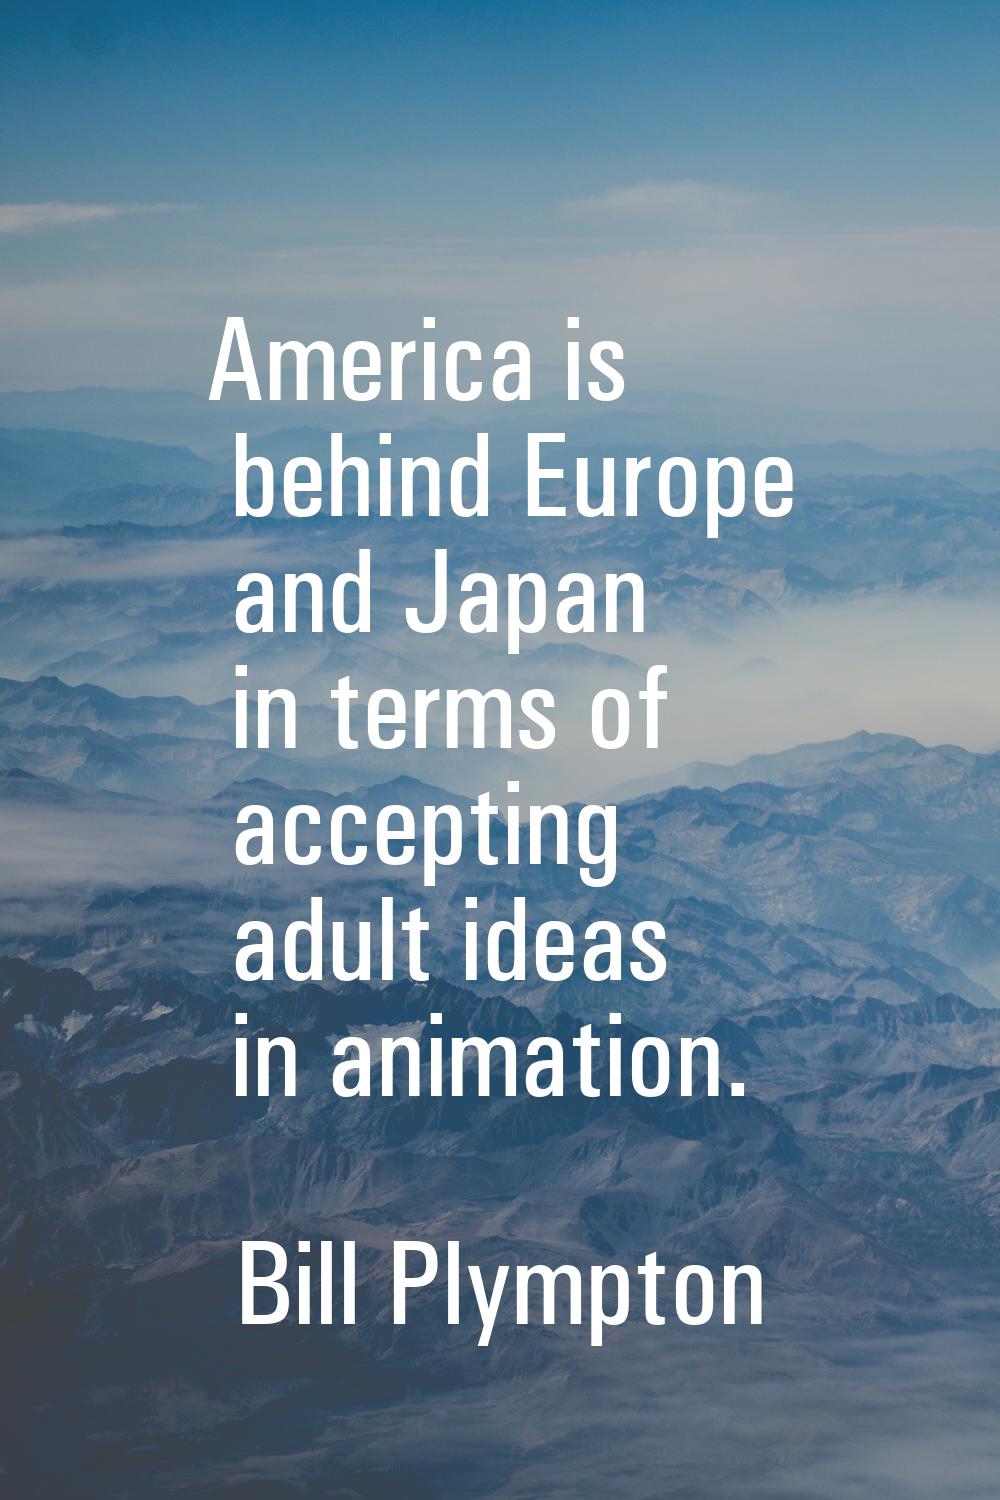 America is behind Europe and Japan in terms of accepting adult ideas in animation.